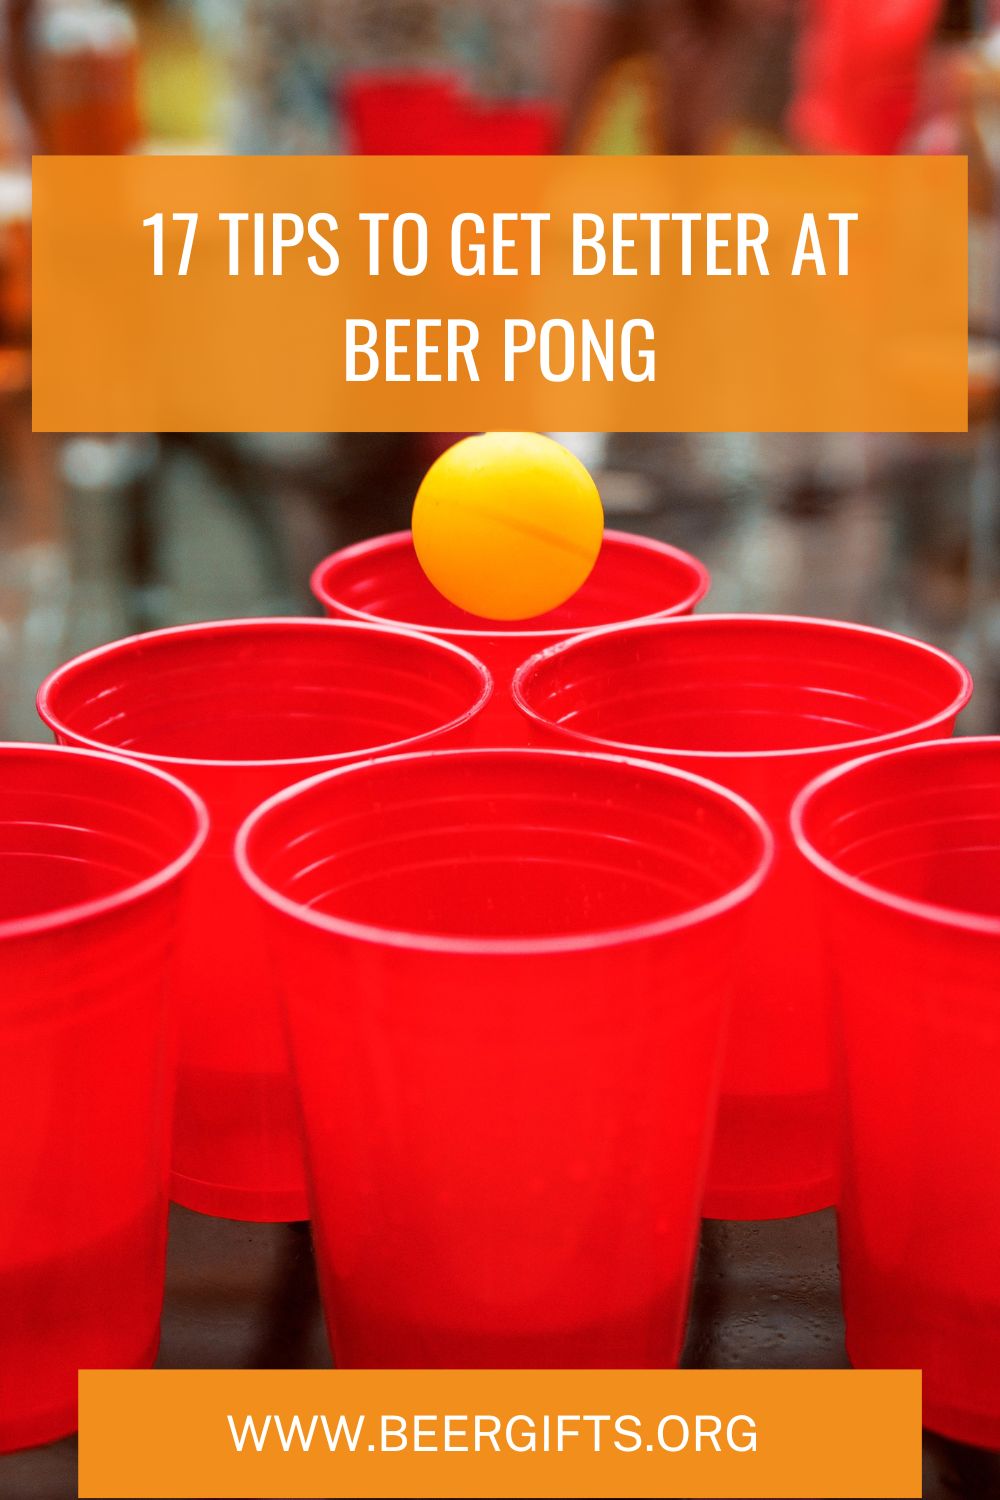 17 Tips To Get Better at Beer Pong2